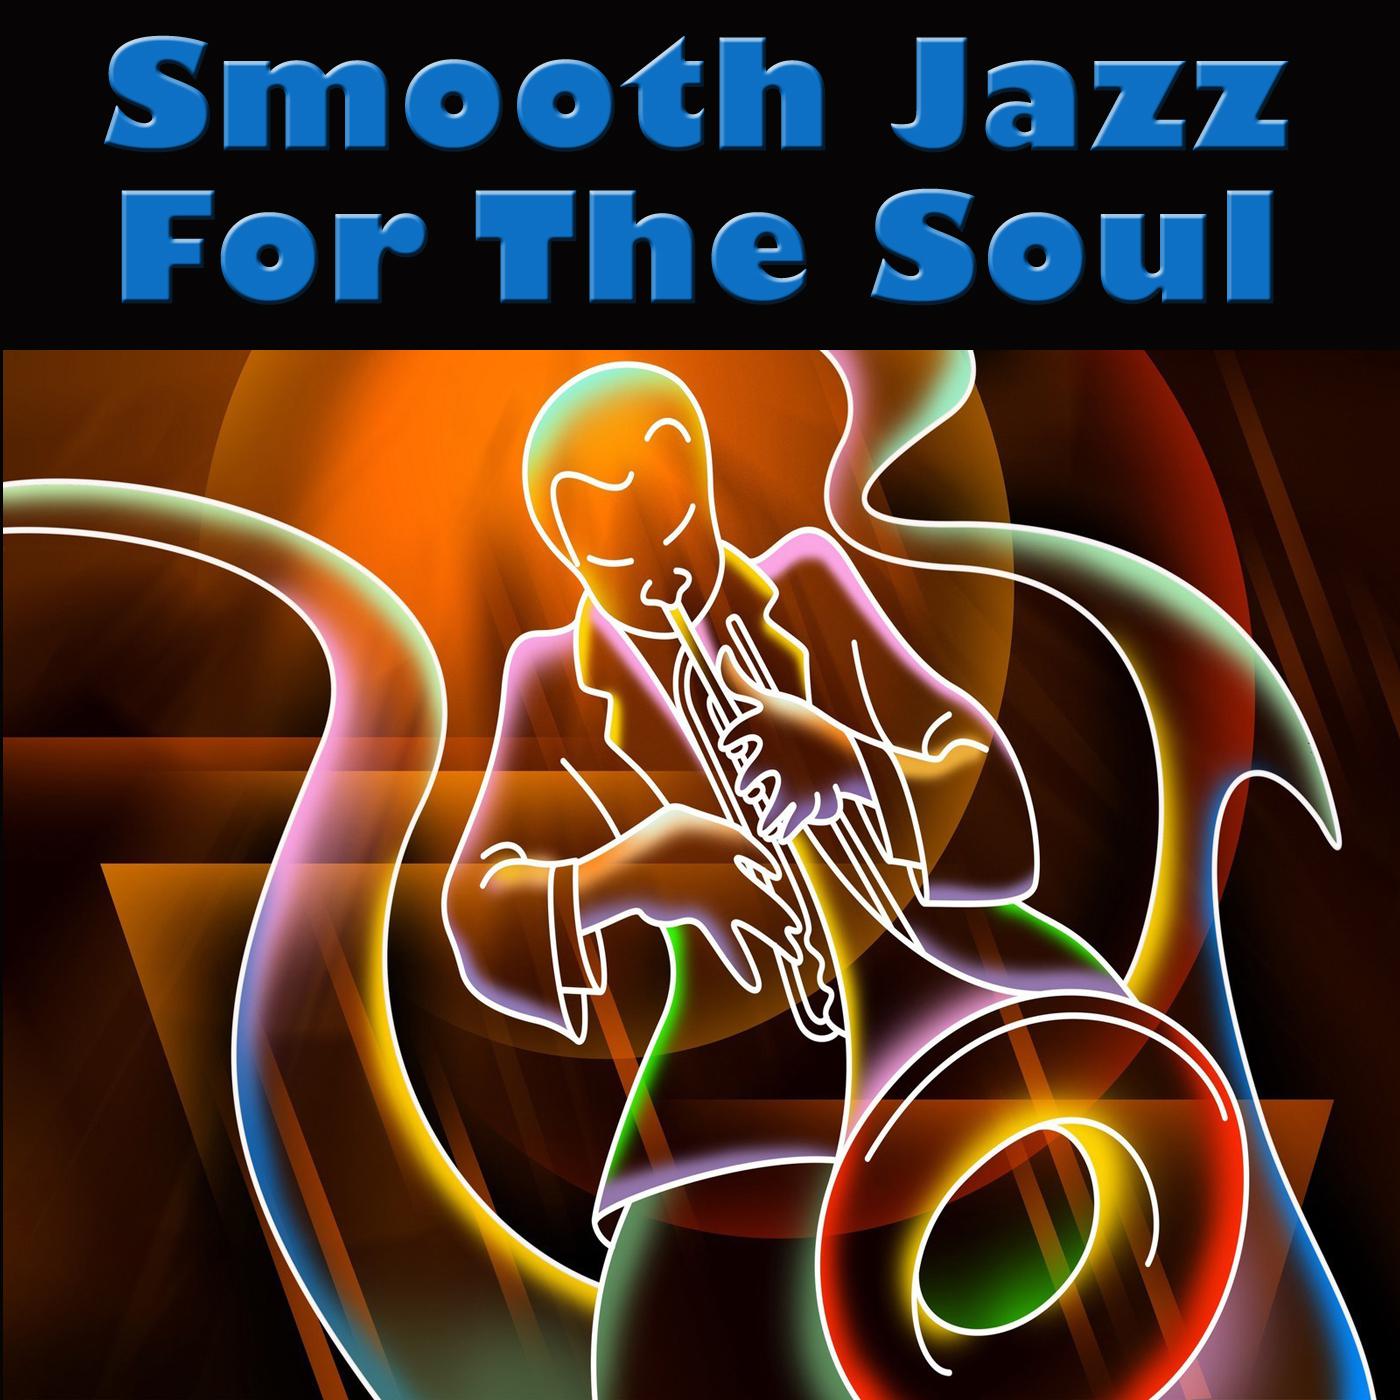 Smooth Jazz For The Soul